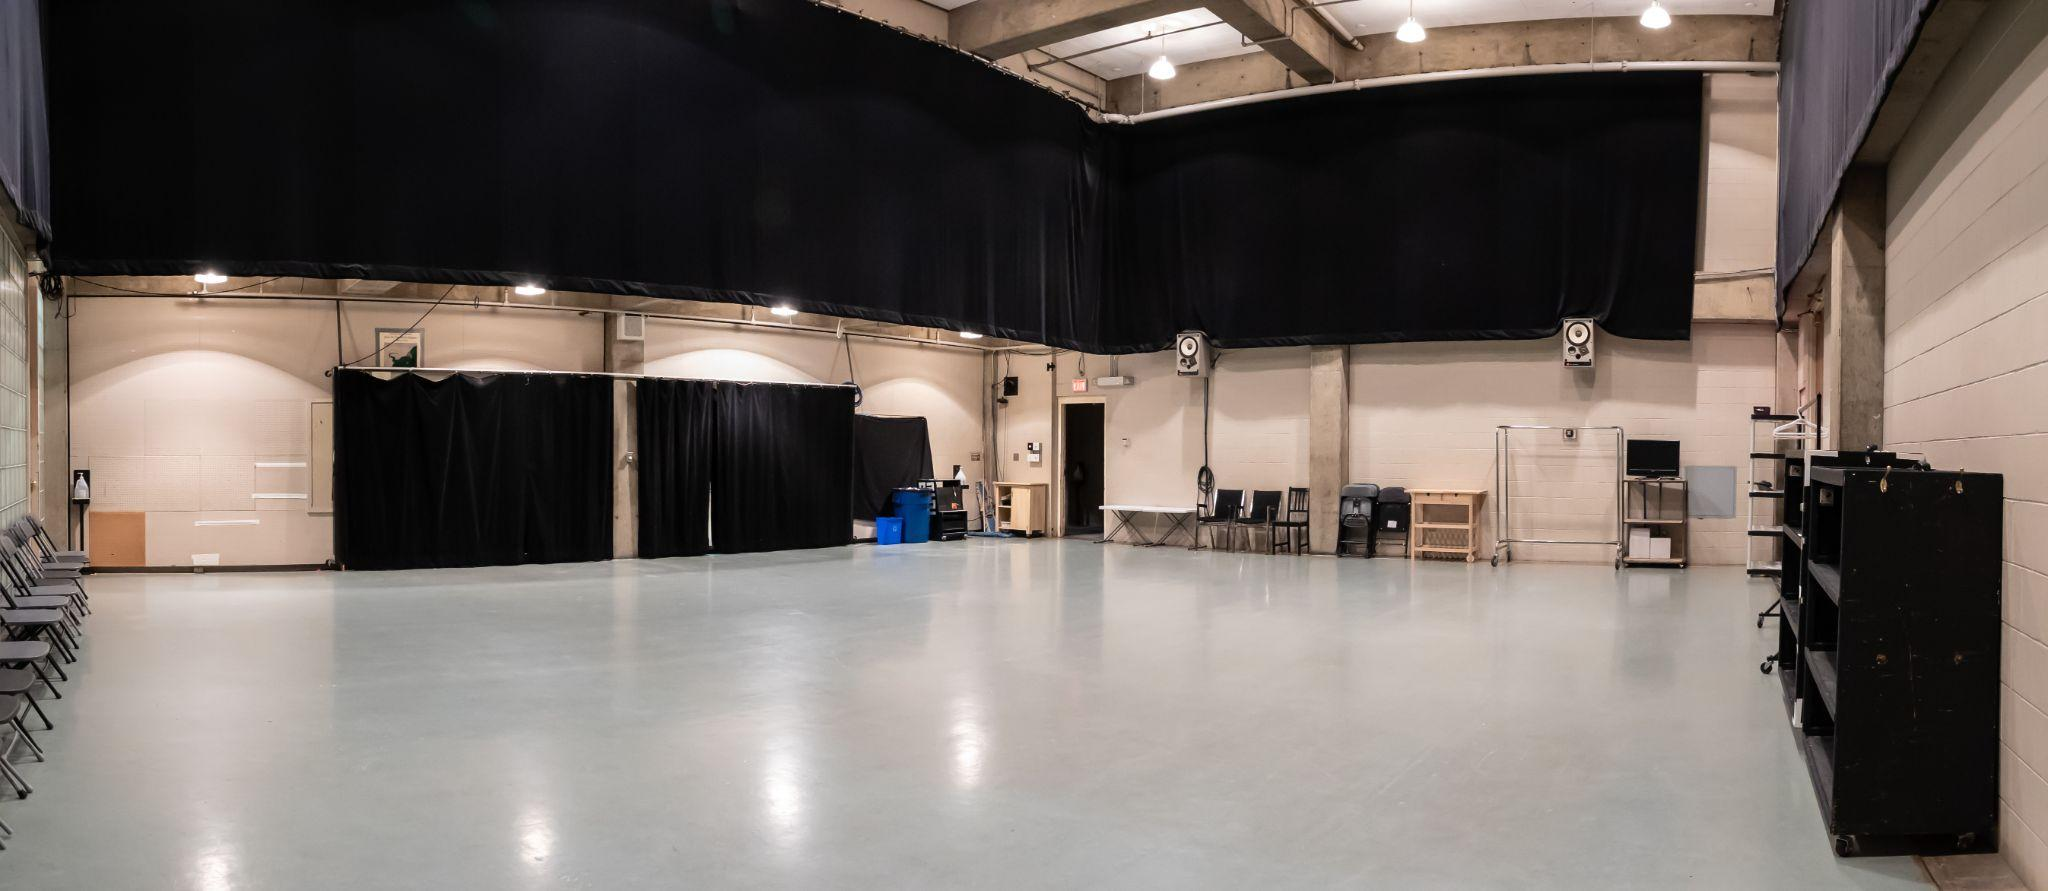 View of Shoctor Rehearsal Hall from a corner. There are mirrors covered by curtains and a sprung, open flooring space.